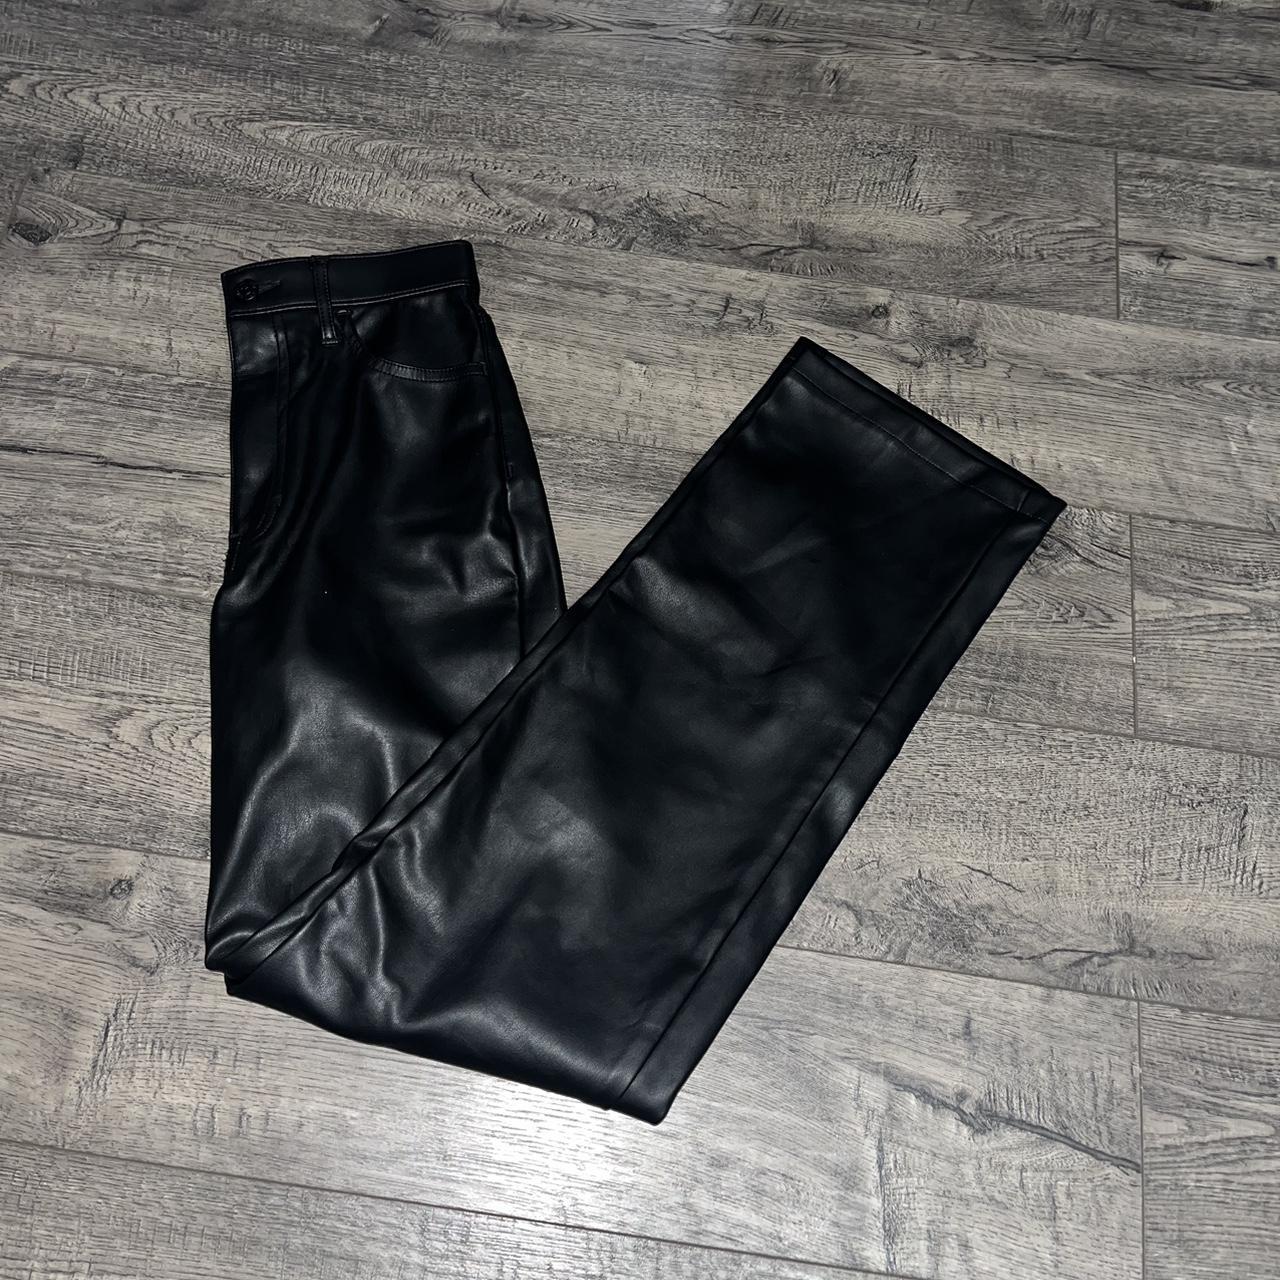 Hollister Leather Pants These are high rise wide - Depop